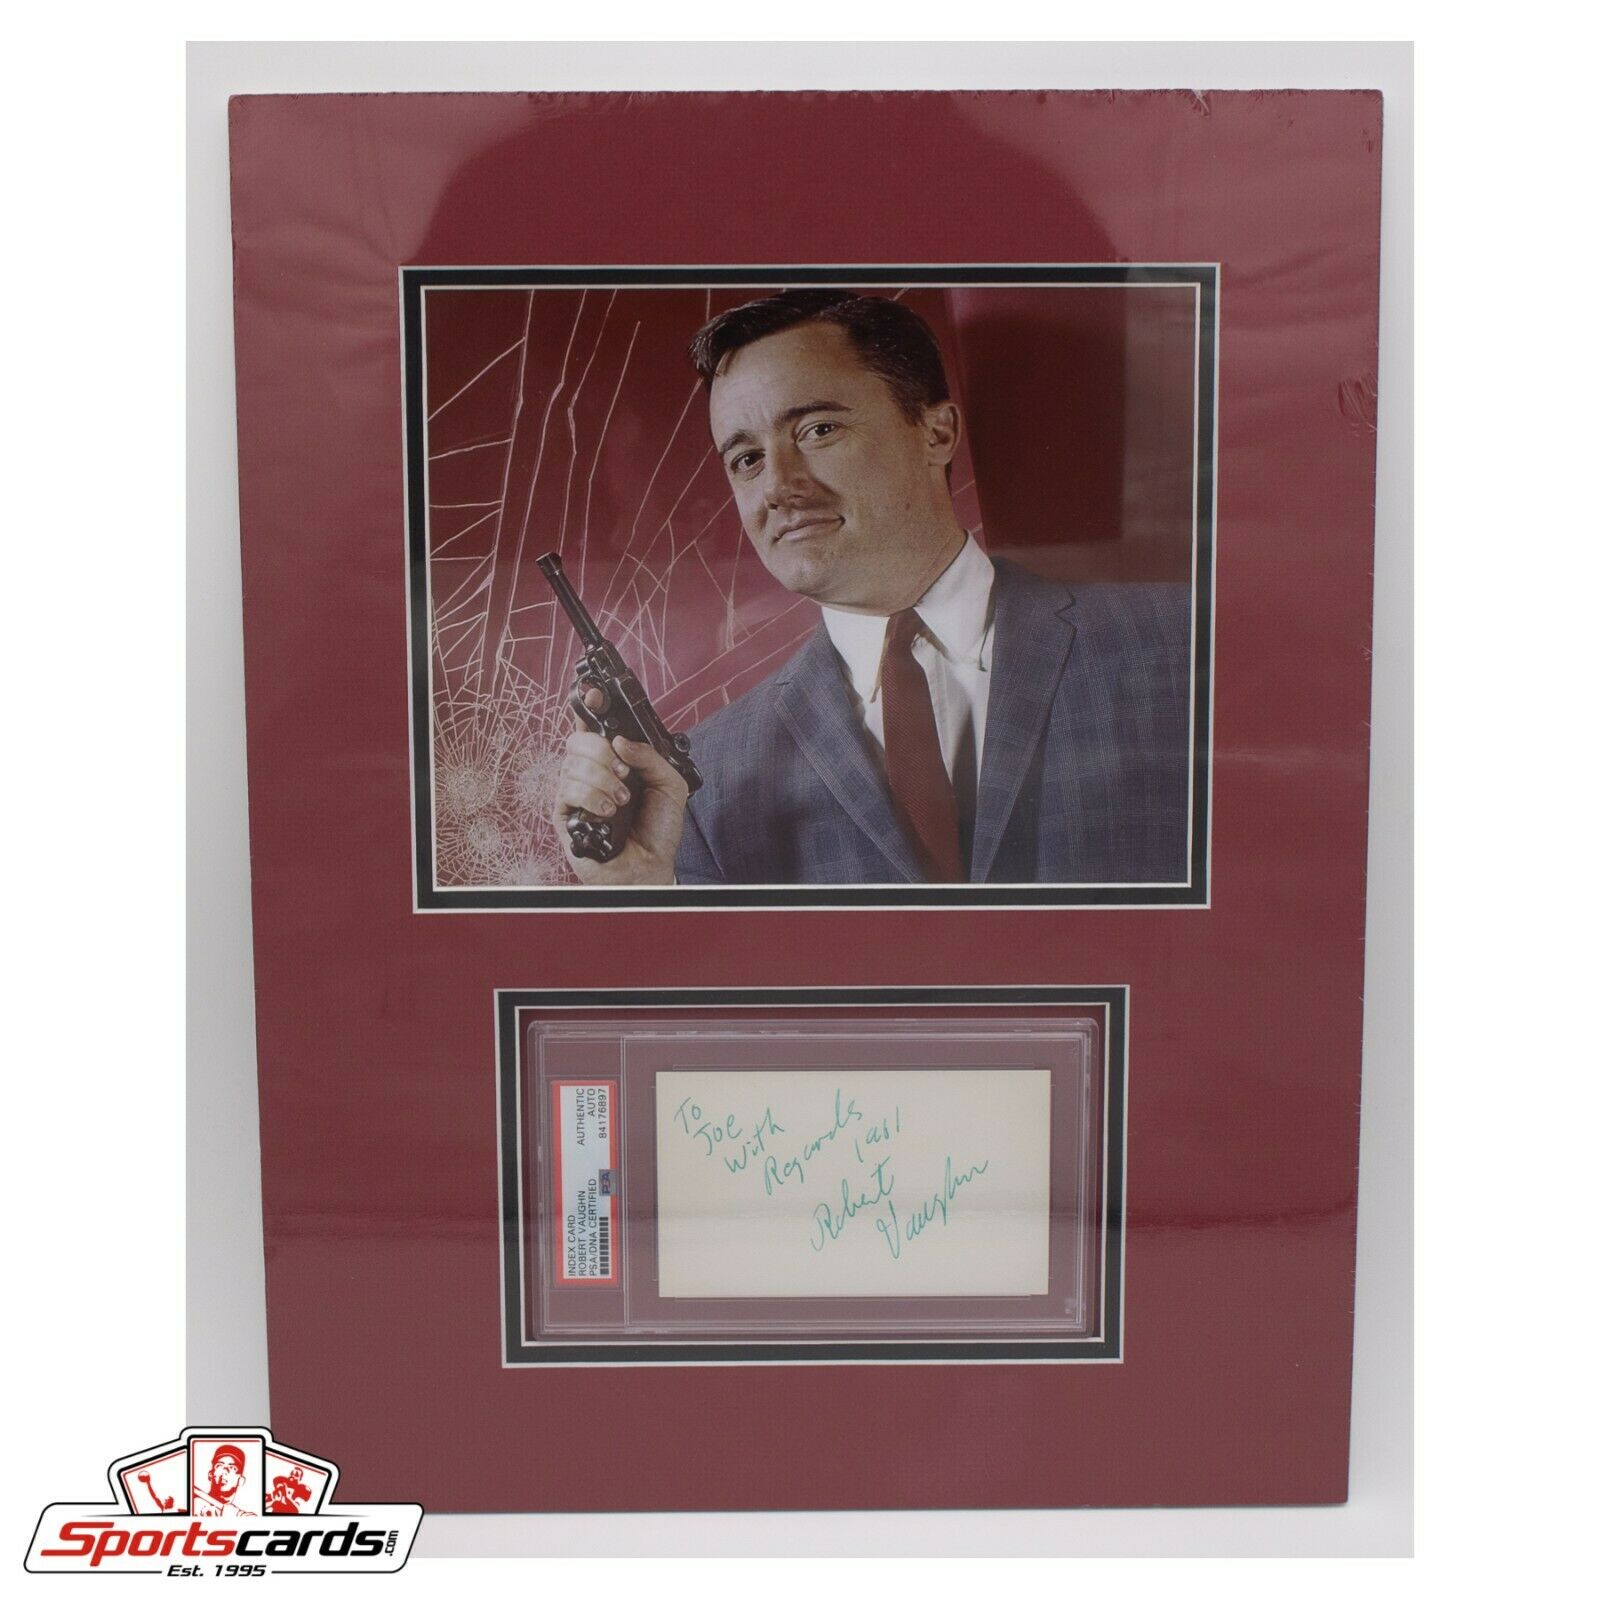 Robert Vaughn Actor PSA/DNA Signed 3x5 Matted with 8x10 Photo